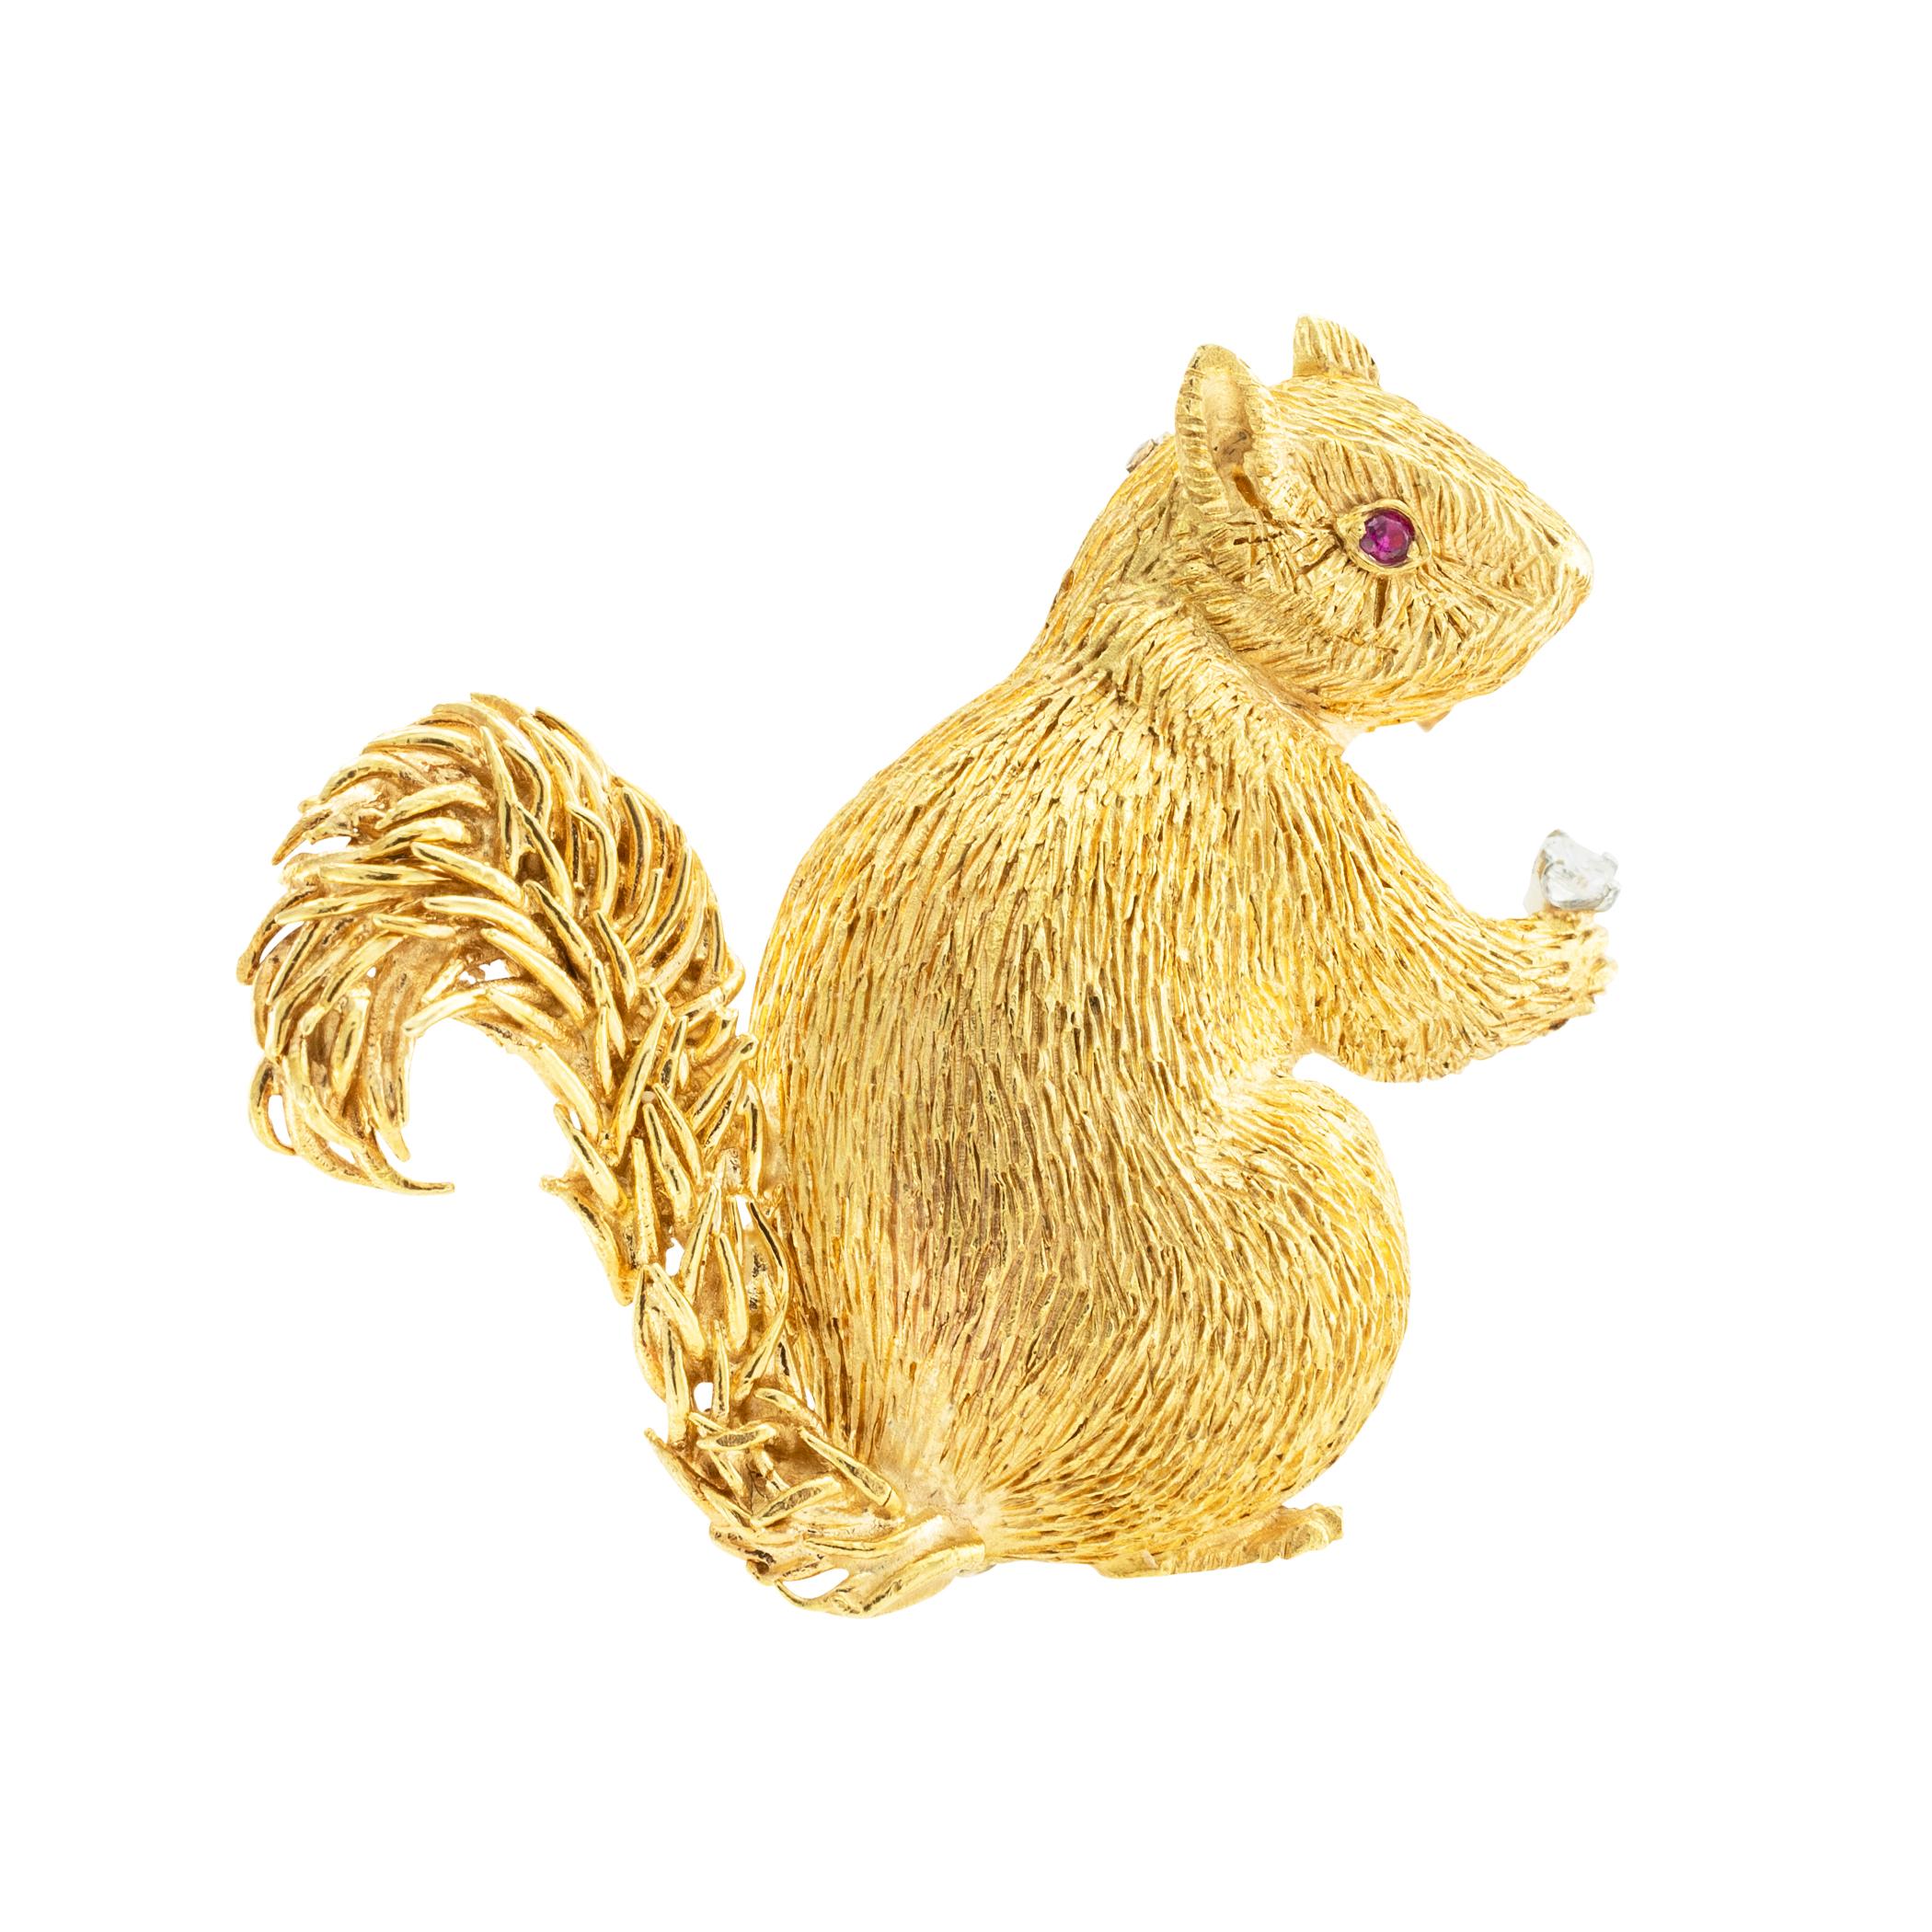 Diamond and ruby yellow gold squirrel clip brooch circa 1970. *

ABOUT THIS ITEM:  #P-DJ310J.  Scroll down for detailed specifications. The movements and stance of the squirrel have been beautifully captured by the artist resulting in a realistic